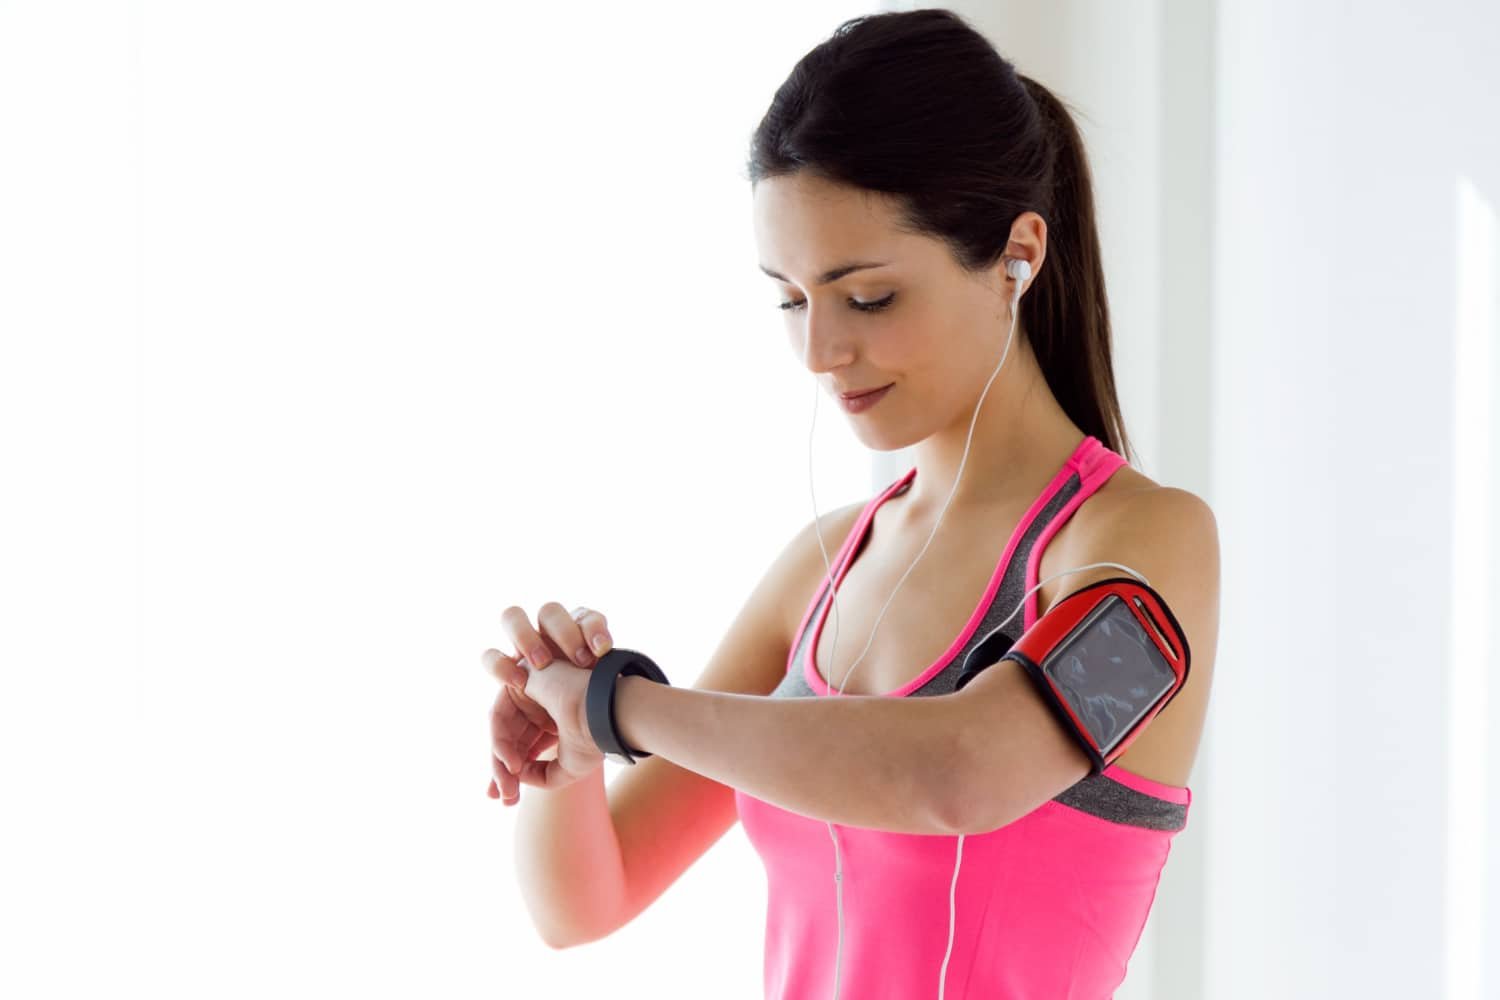 Monitor Your Health With Polar Electro Inc.’s Advanced Fitness Trackers